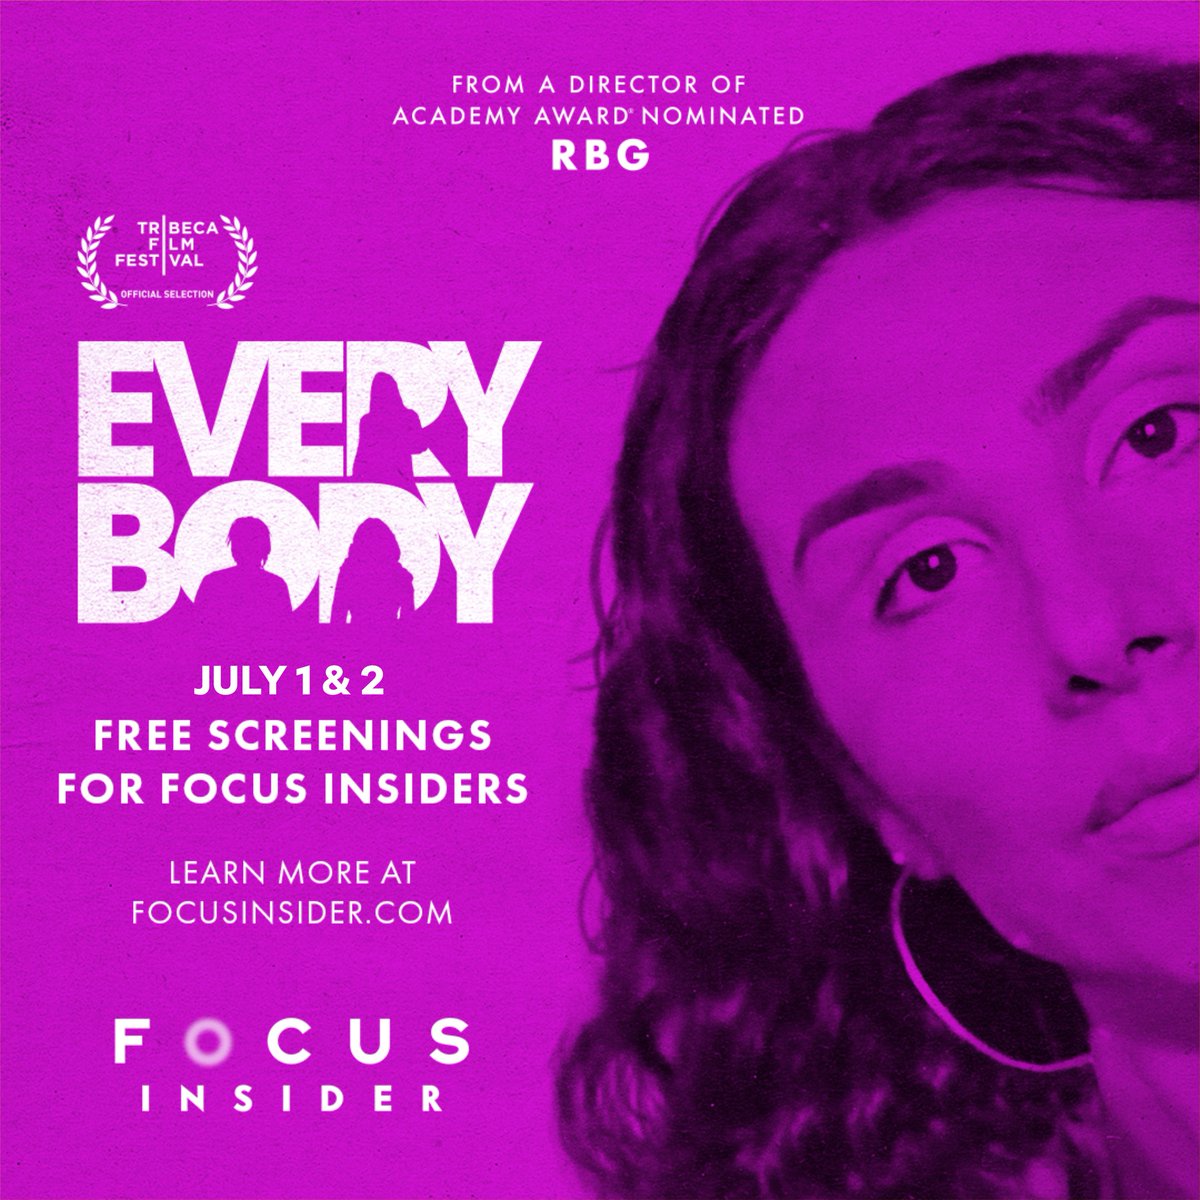 Go beyond the binary, and become a Focus Insider to see an exclusive screening of #EveryBodyMovie on July 1 and 2: bit.ly/EveryBodyInsid…